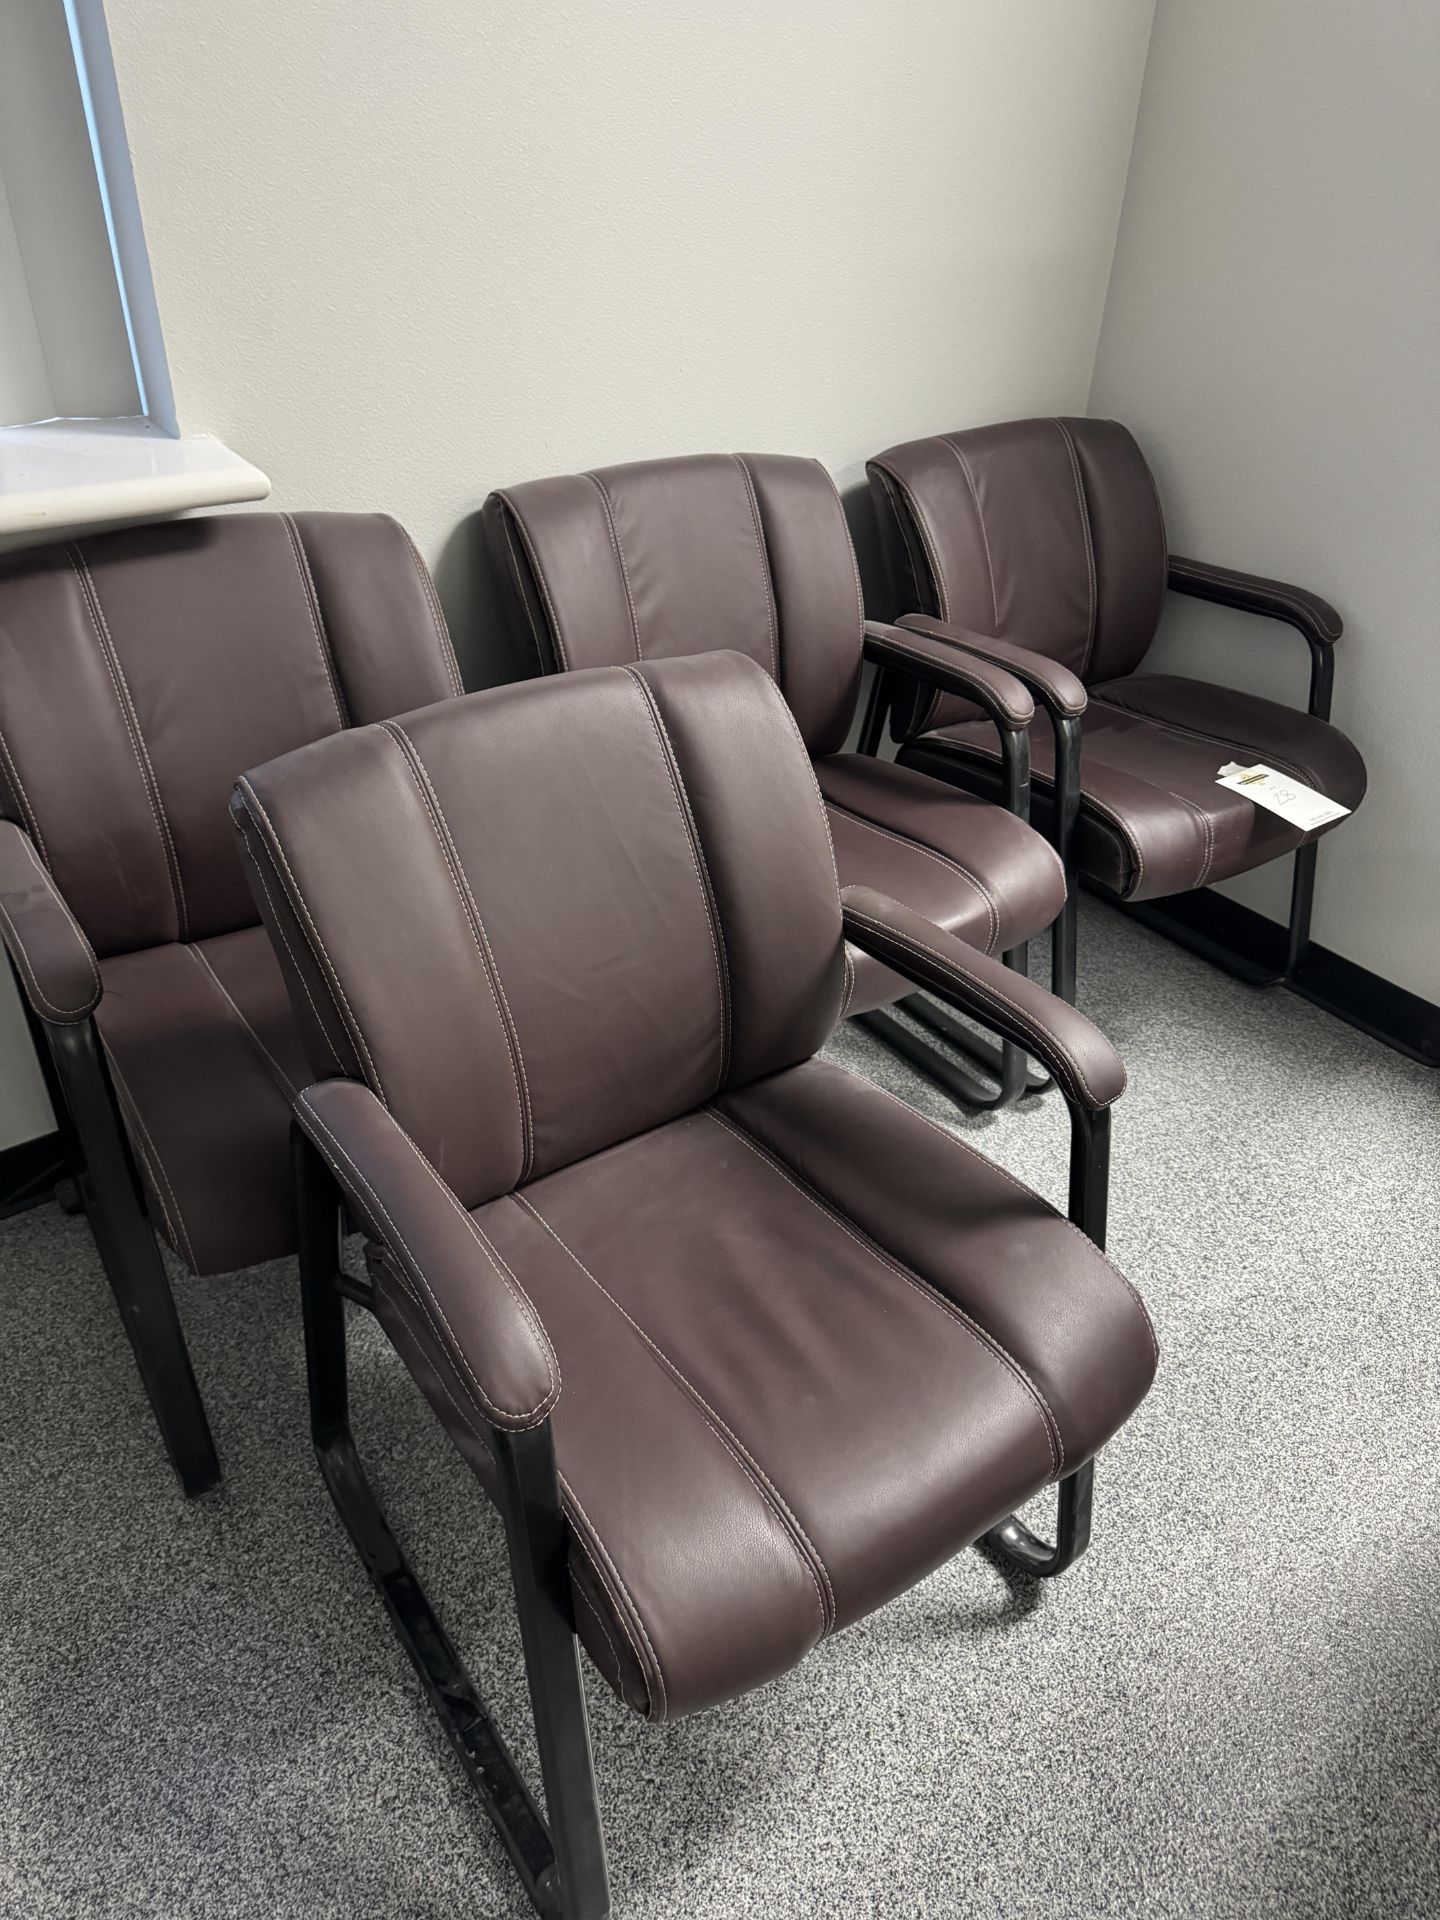 4 LEATHER CHAIRS